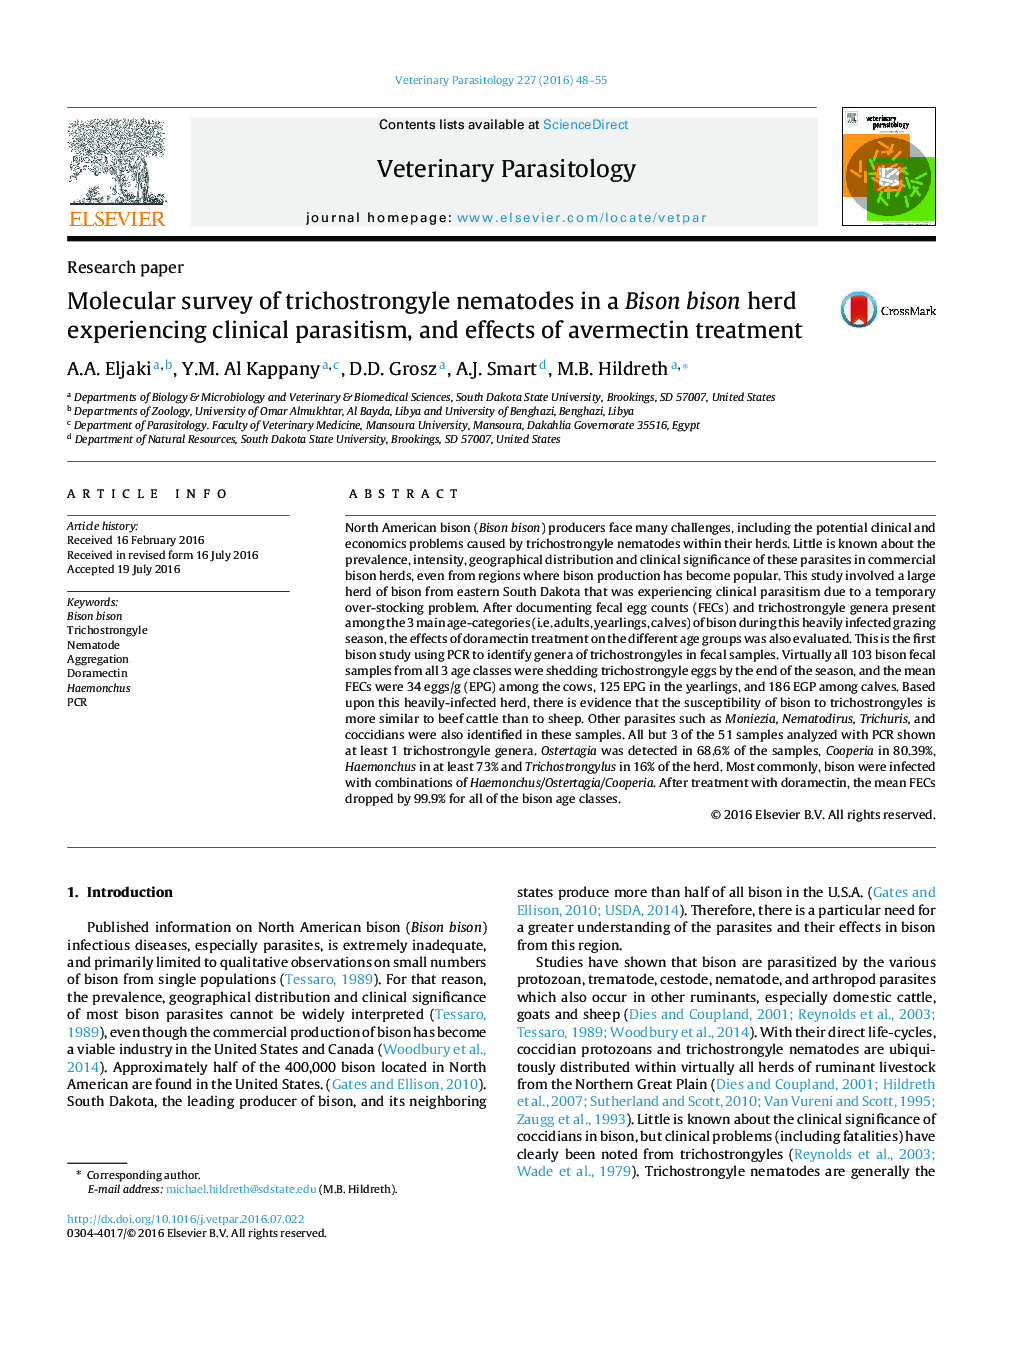 Molecular survey of trichostrongyle nematodes in a Bison bison herd experiencing clinical parasitism, and effects of avermectin treatment